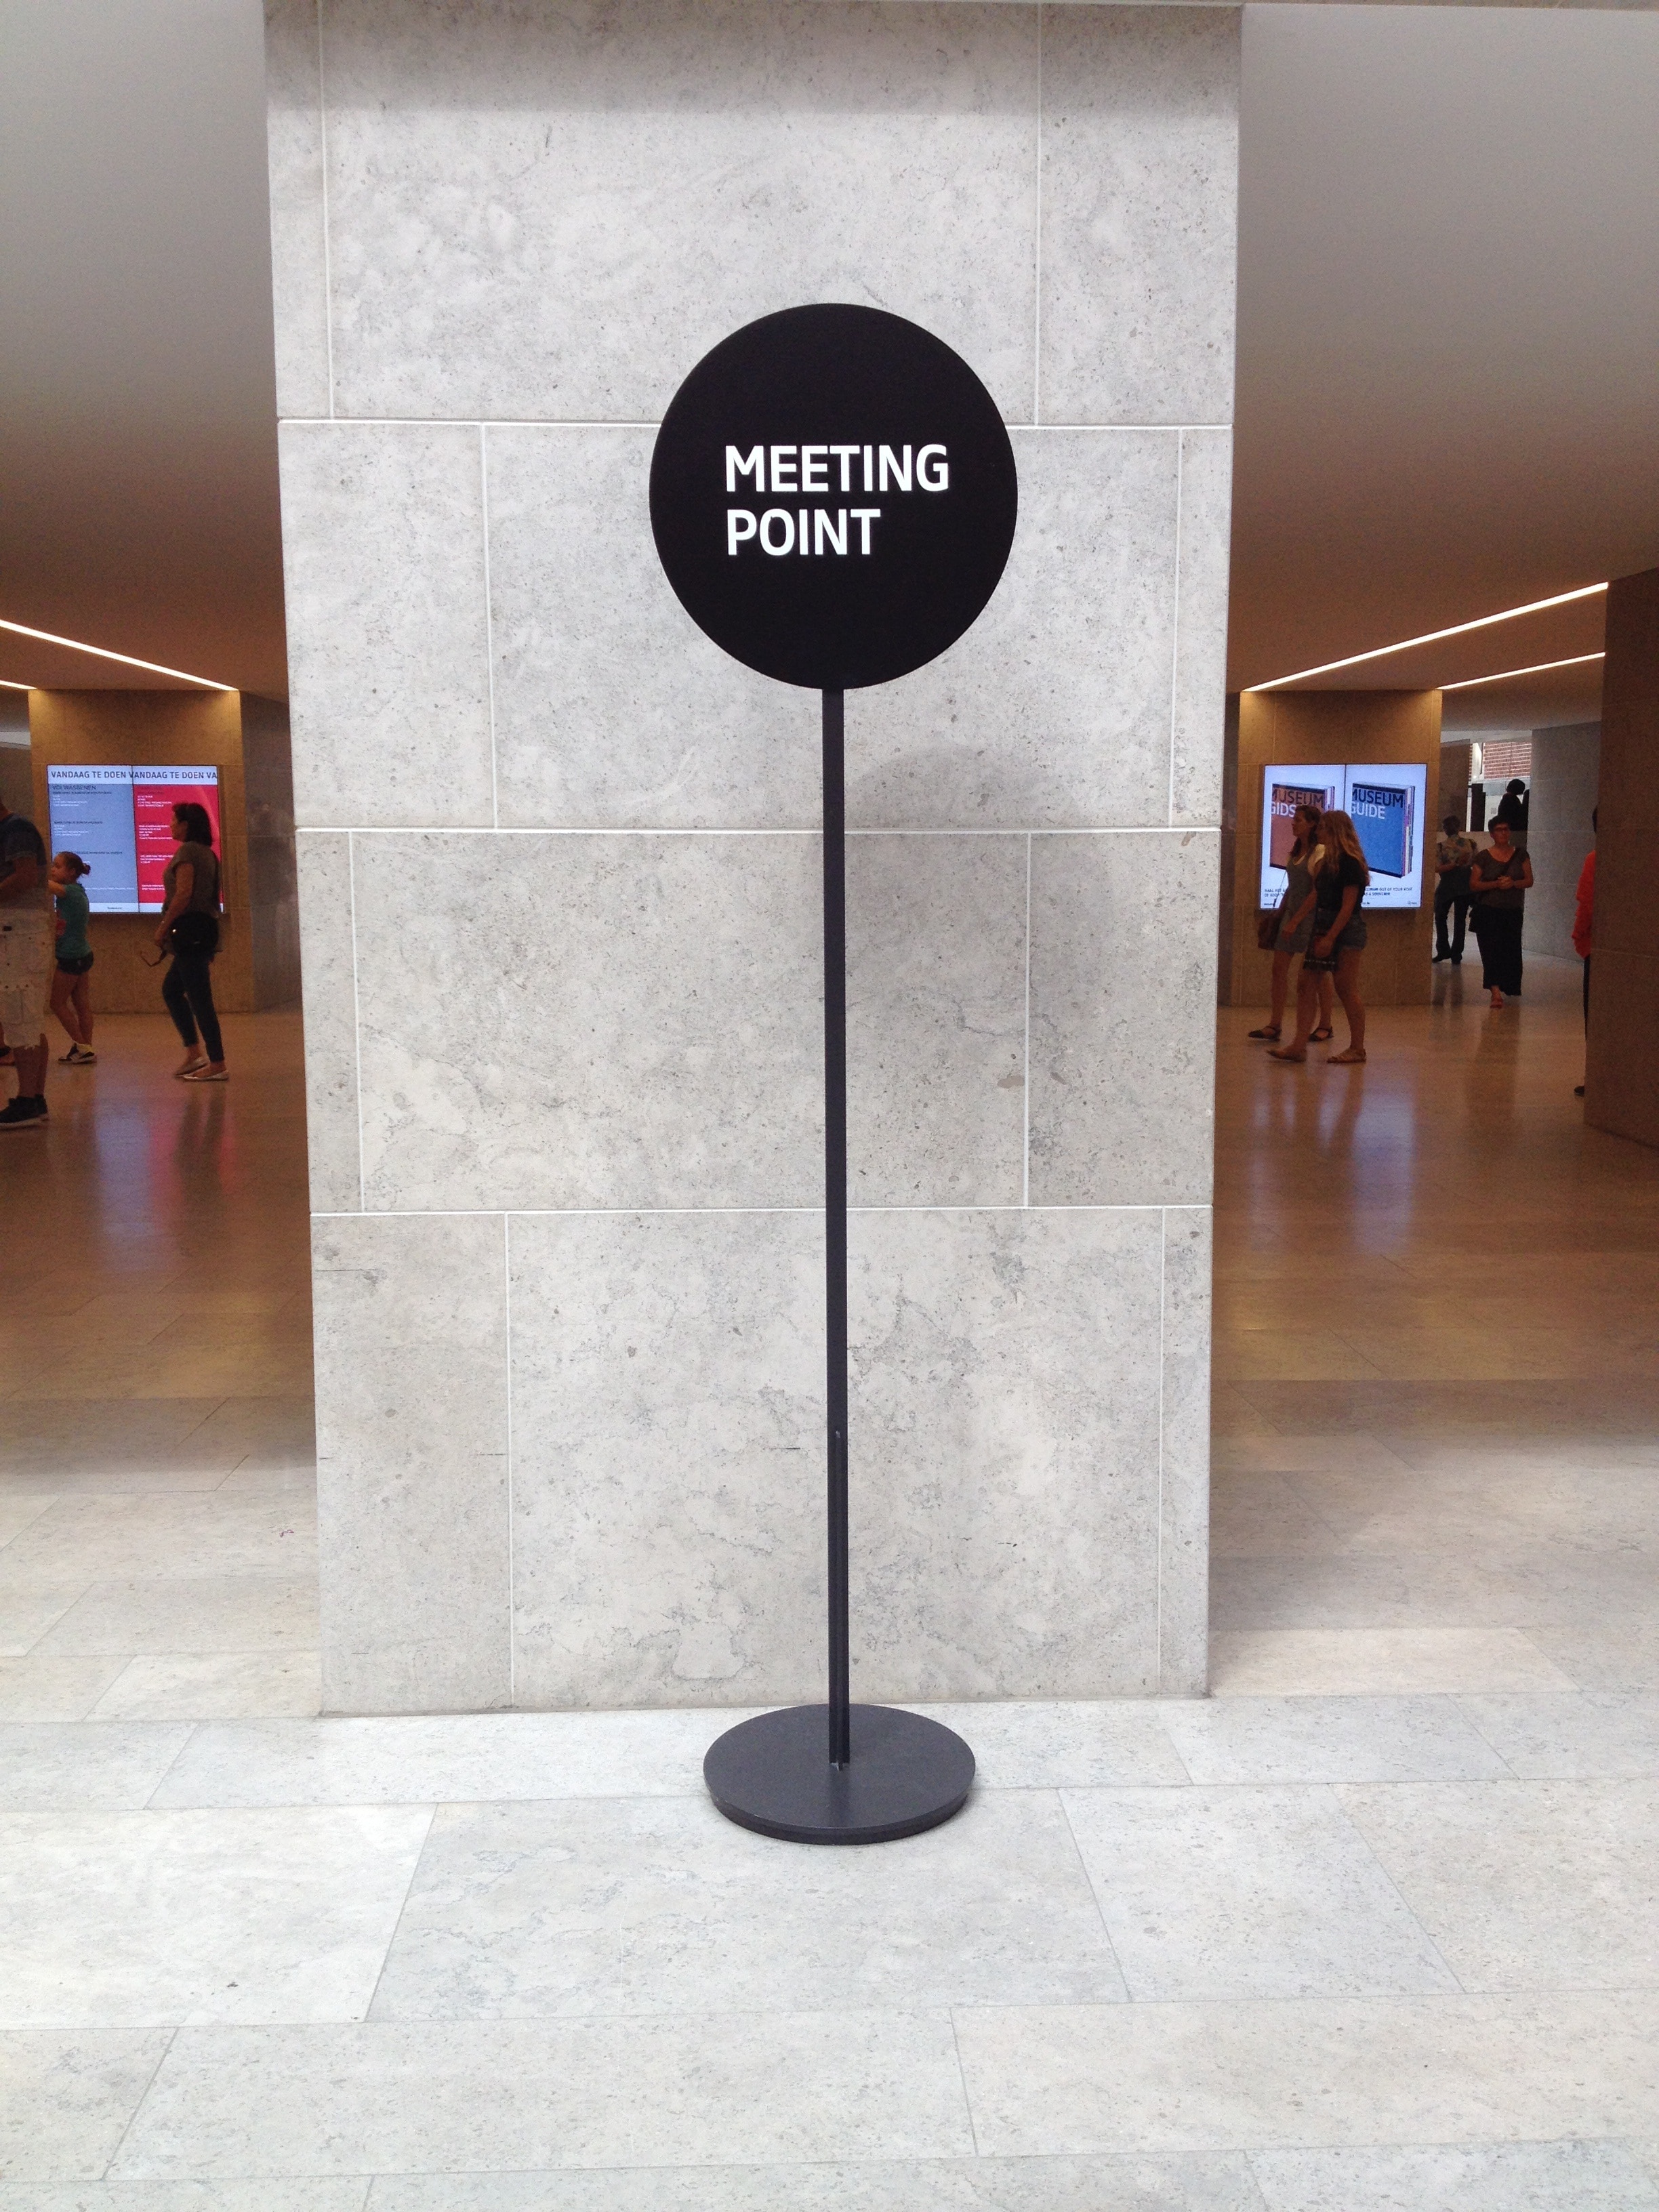 meting point signage